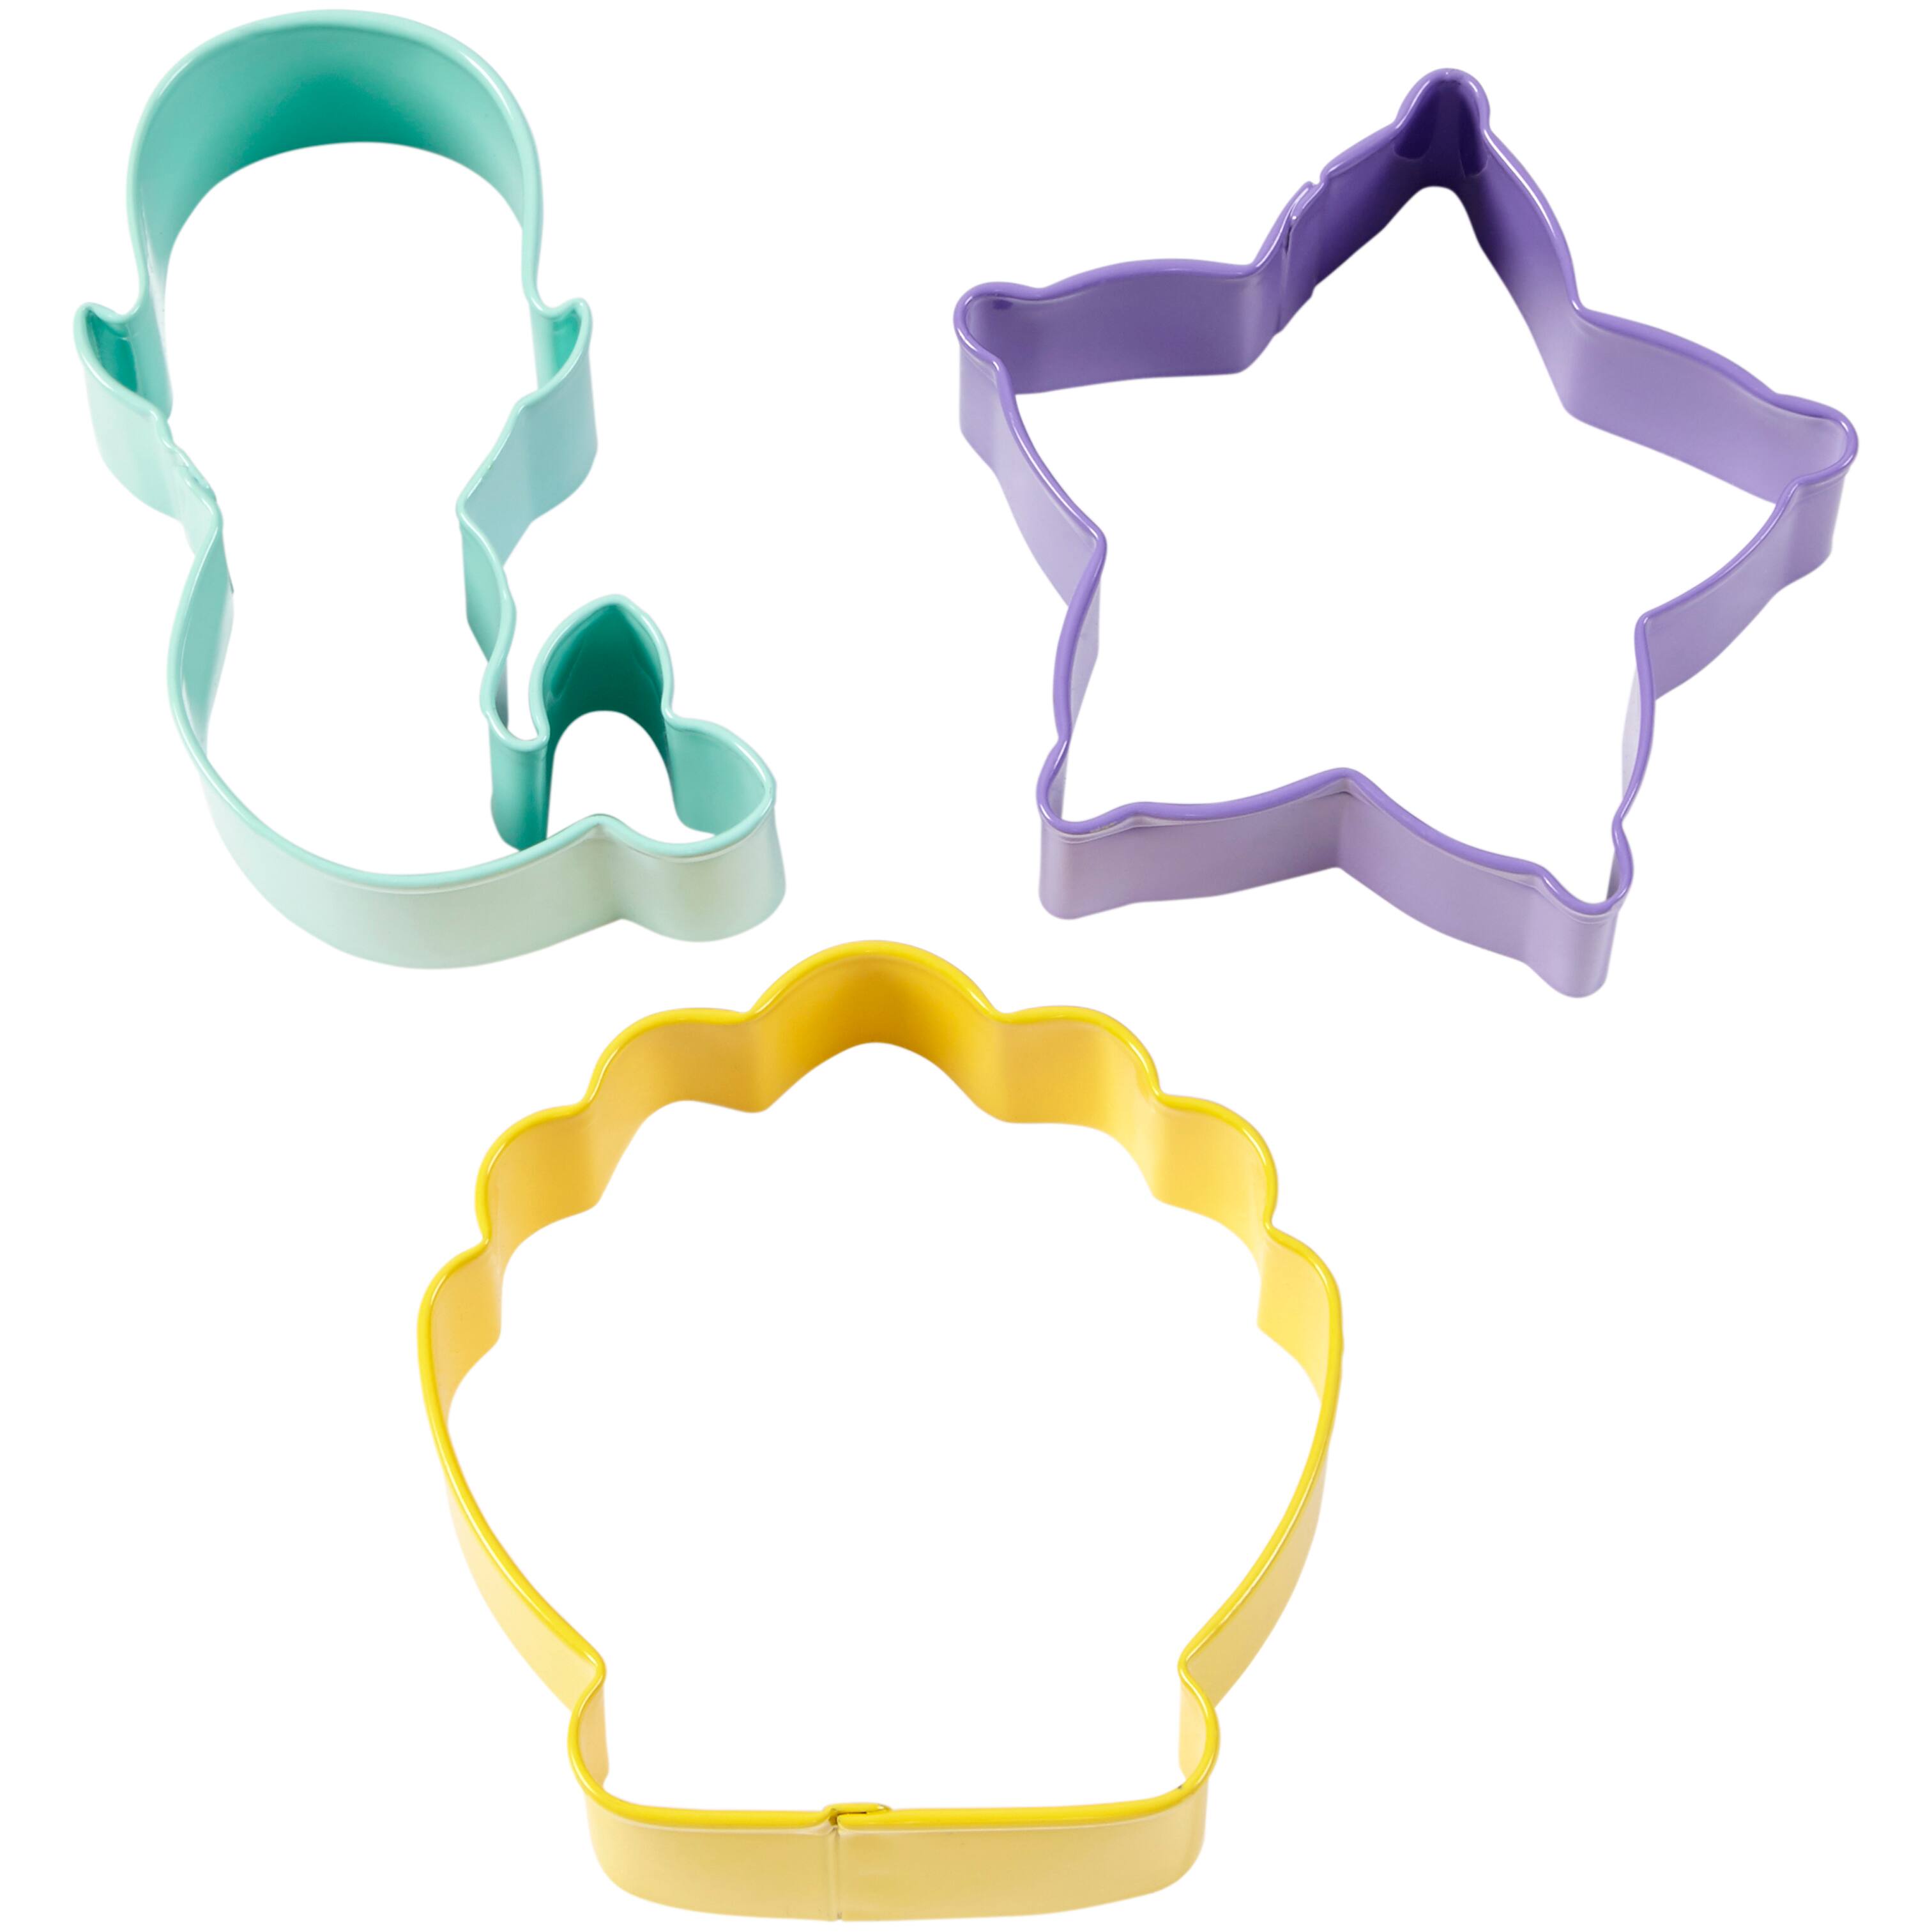 where to buy a cookie cutter